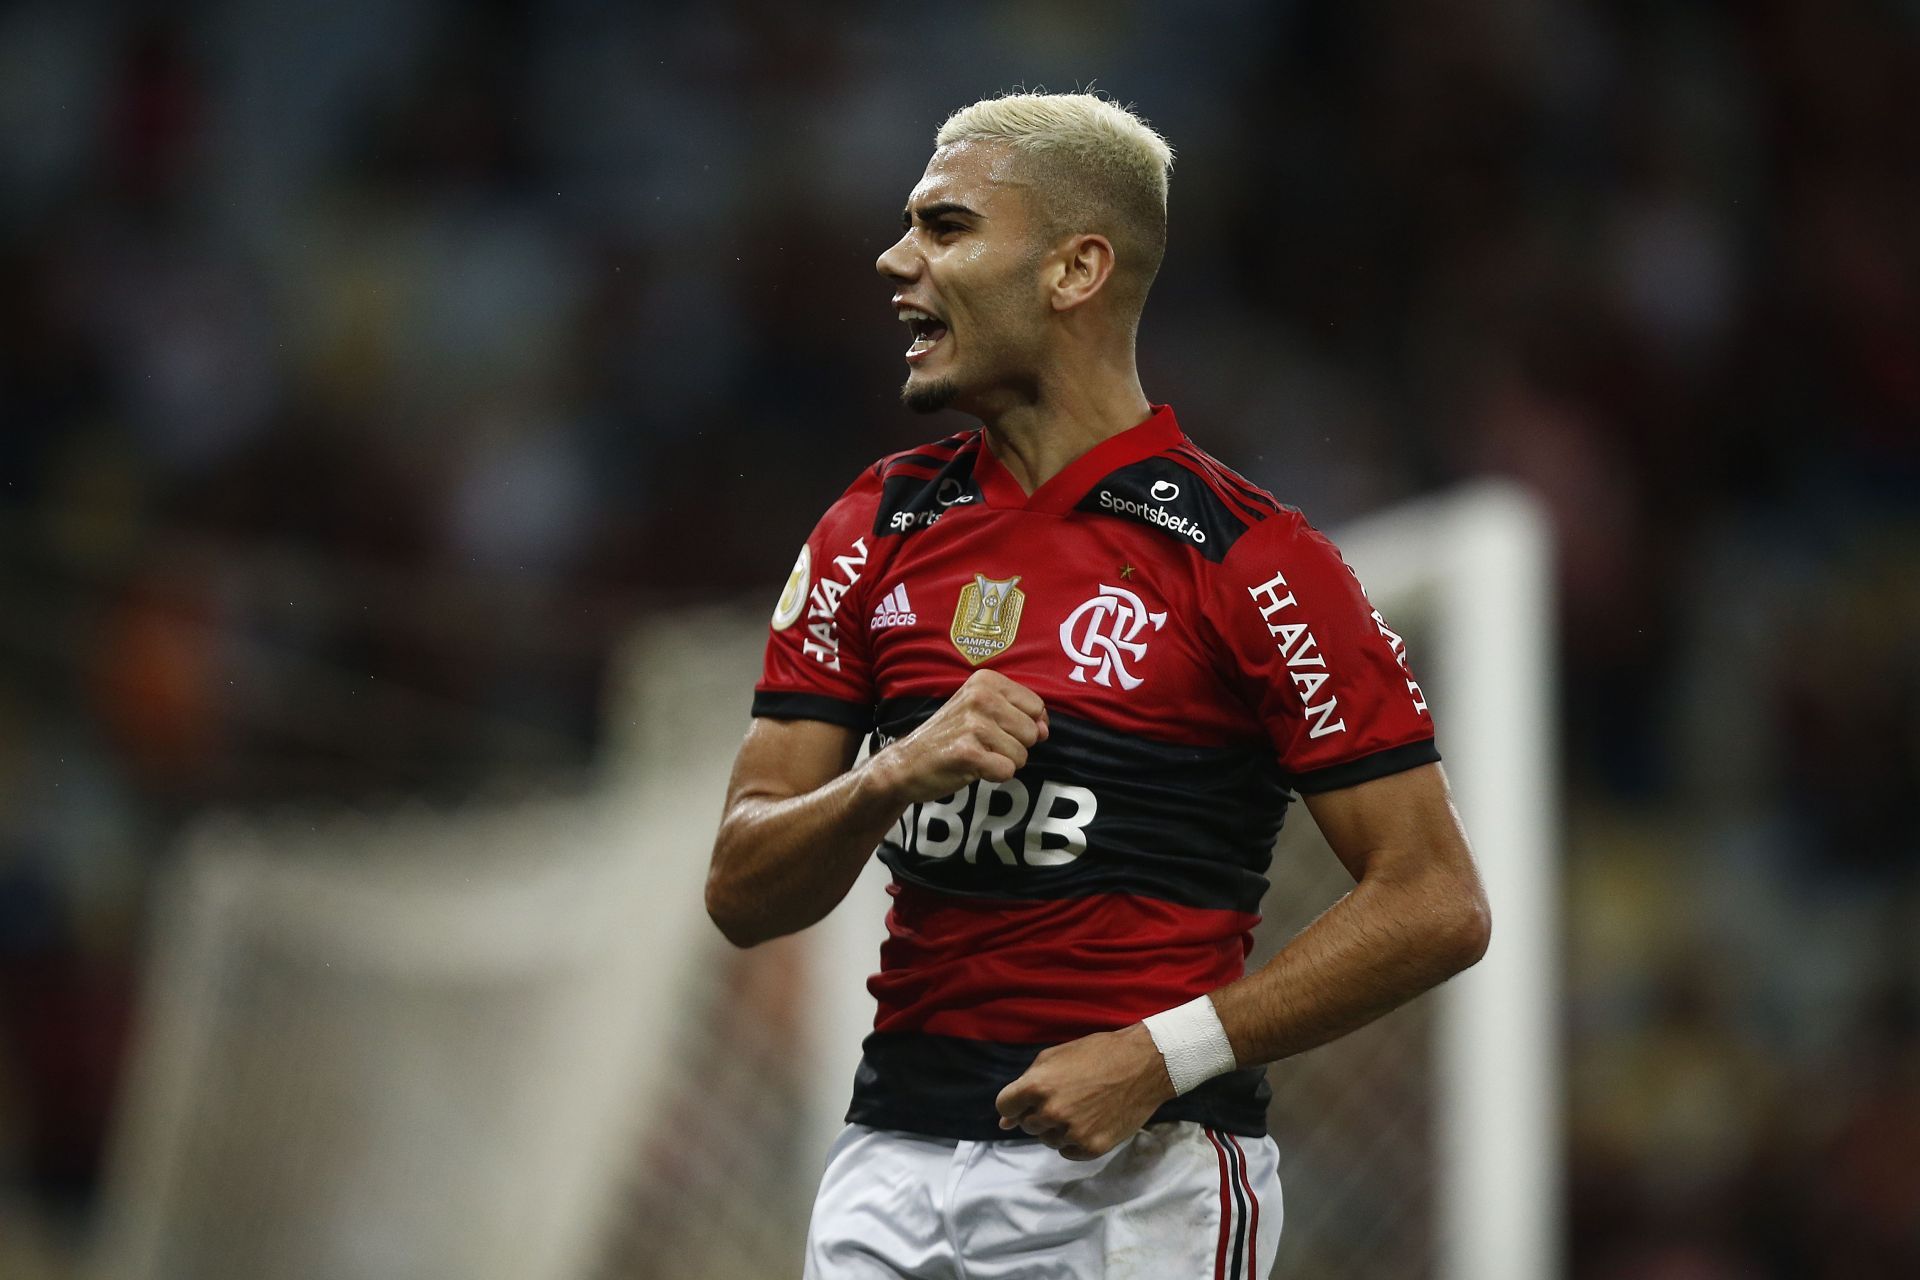 Flamengo have offered to pay &euro;8 million for Andreas Pereira.